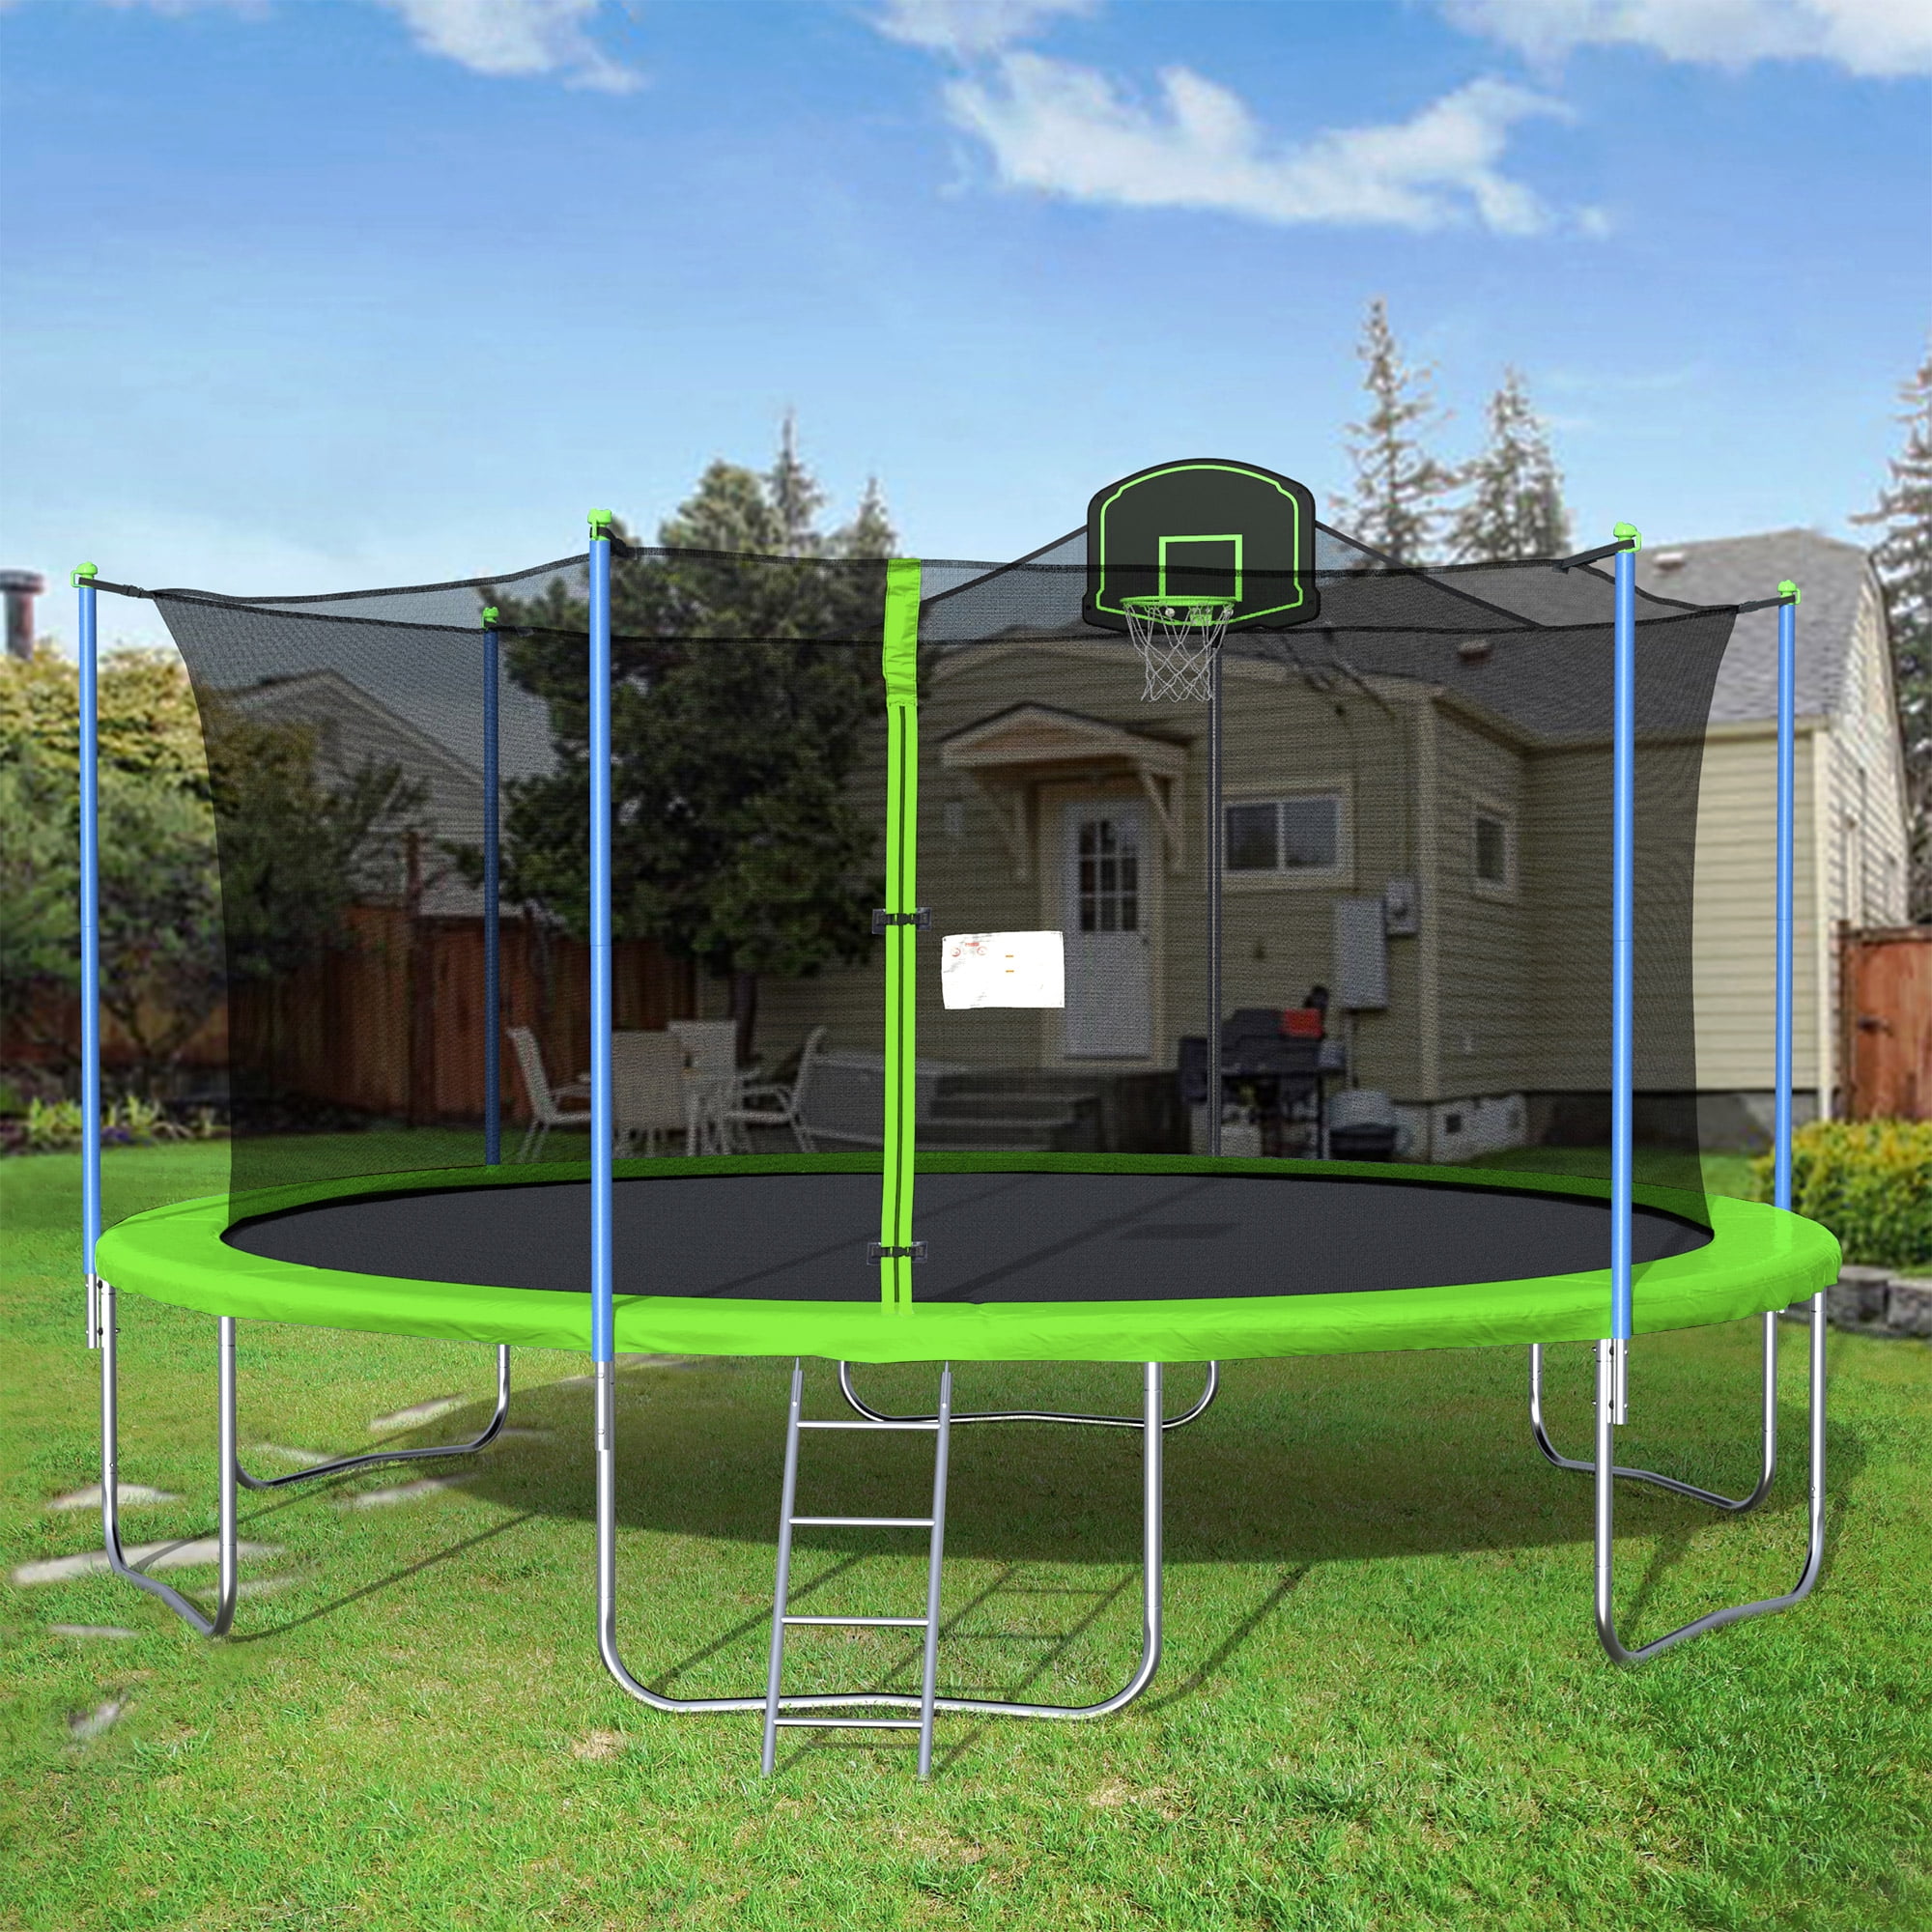 16 FT Kids Trampoline with Safety Net, Outdoor Trampoline with Basketball Hoop, Enclosure Net&amp;Spring Pad, Trampoline Ladder, Bounce Jumper Trampoline, Indoor Outdoor Play Equipment for Kids, W12947